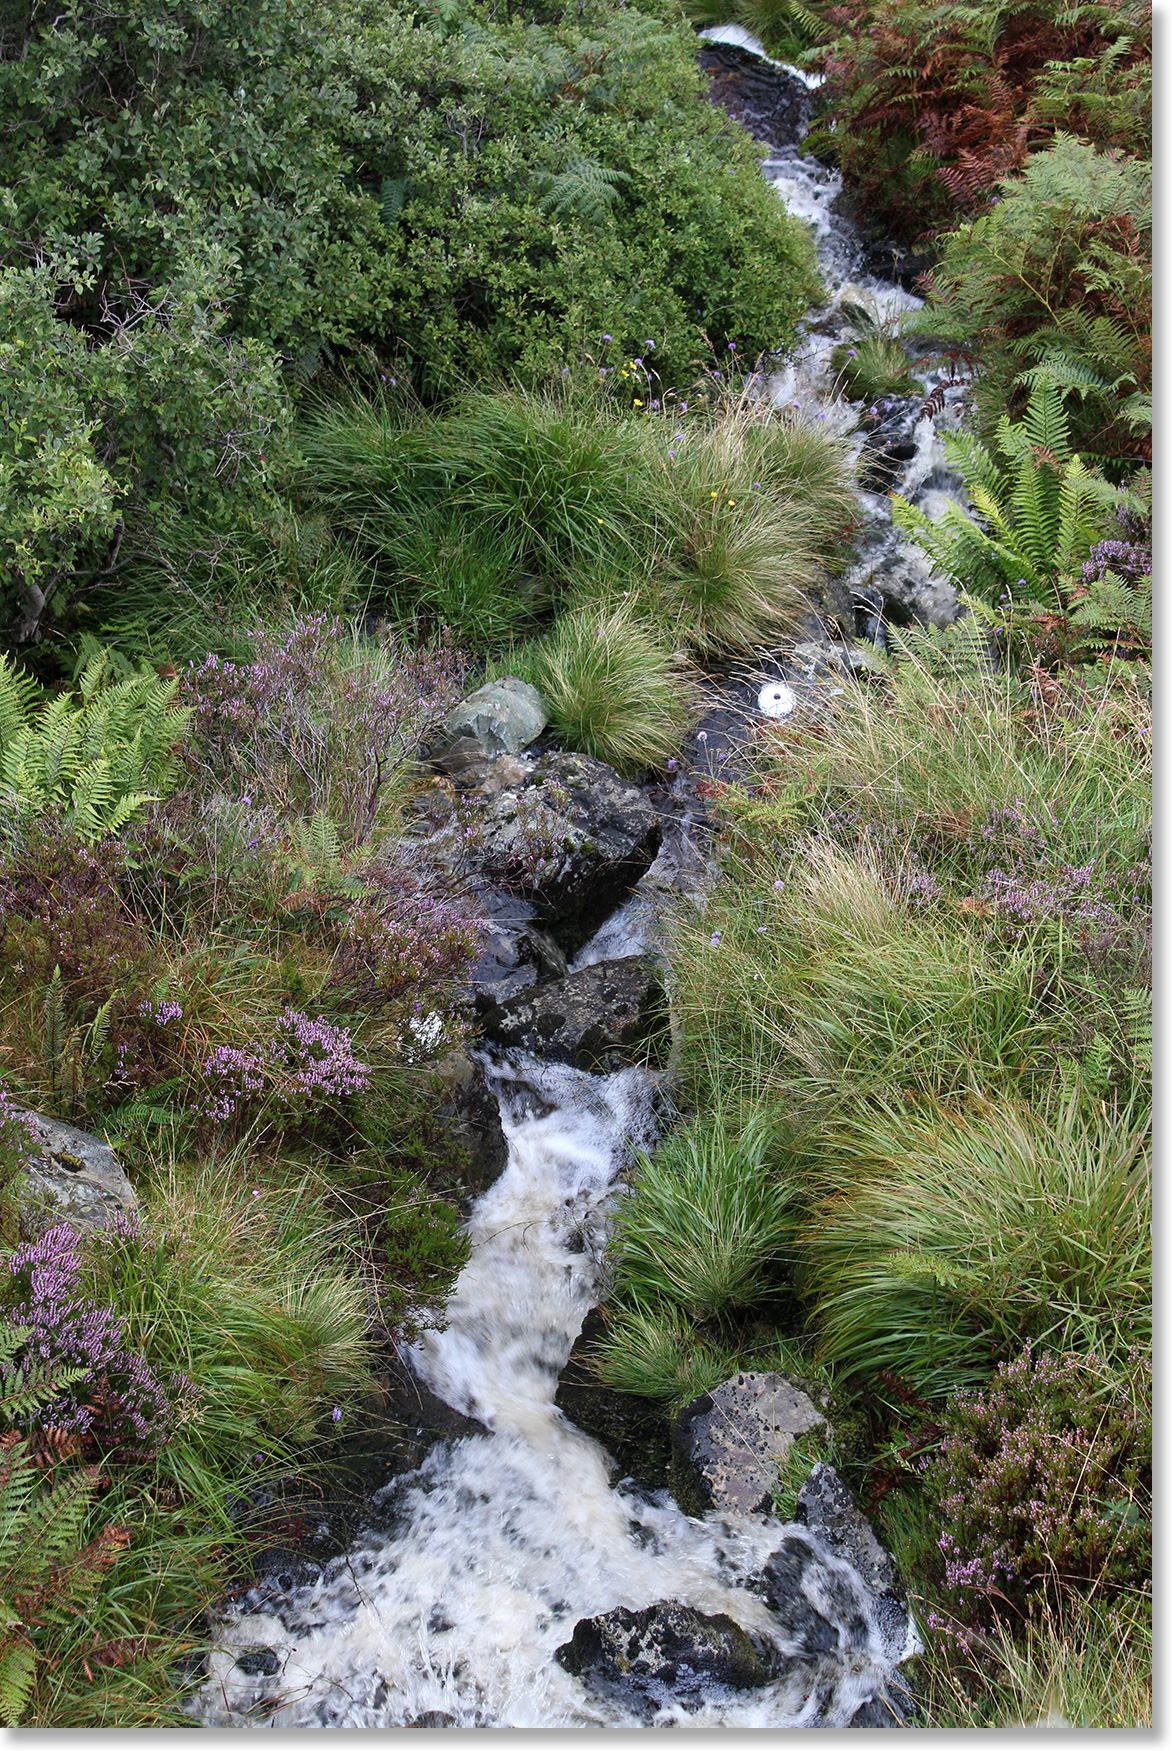 A stream runs downhill through mounds of grass, bracken, and heather on the Isle of Skye, Scotland. Photo by Nic Paget-Clarke.